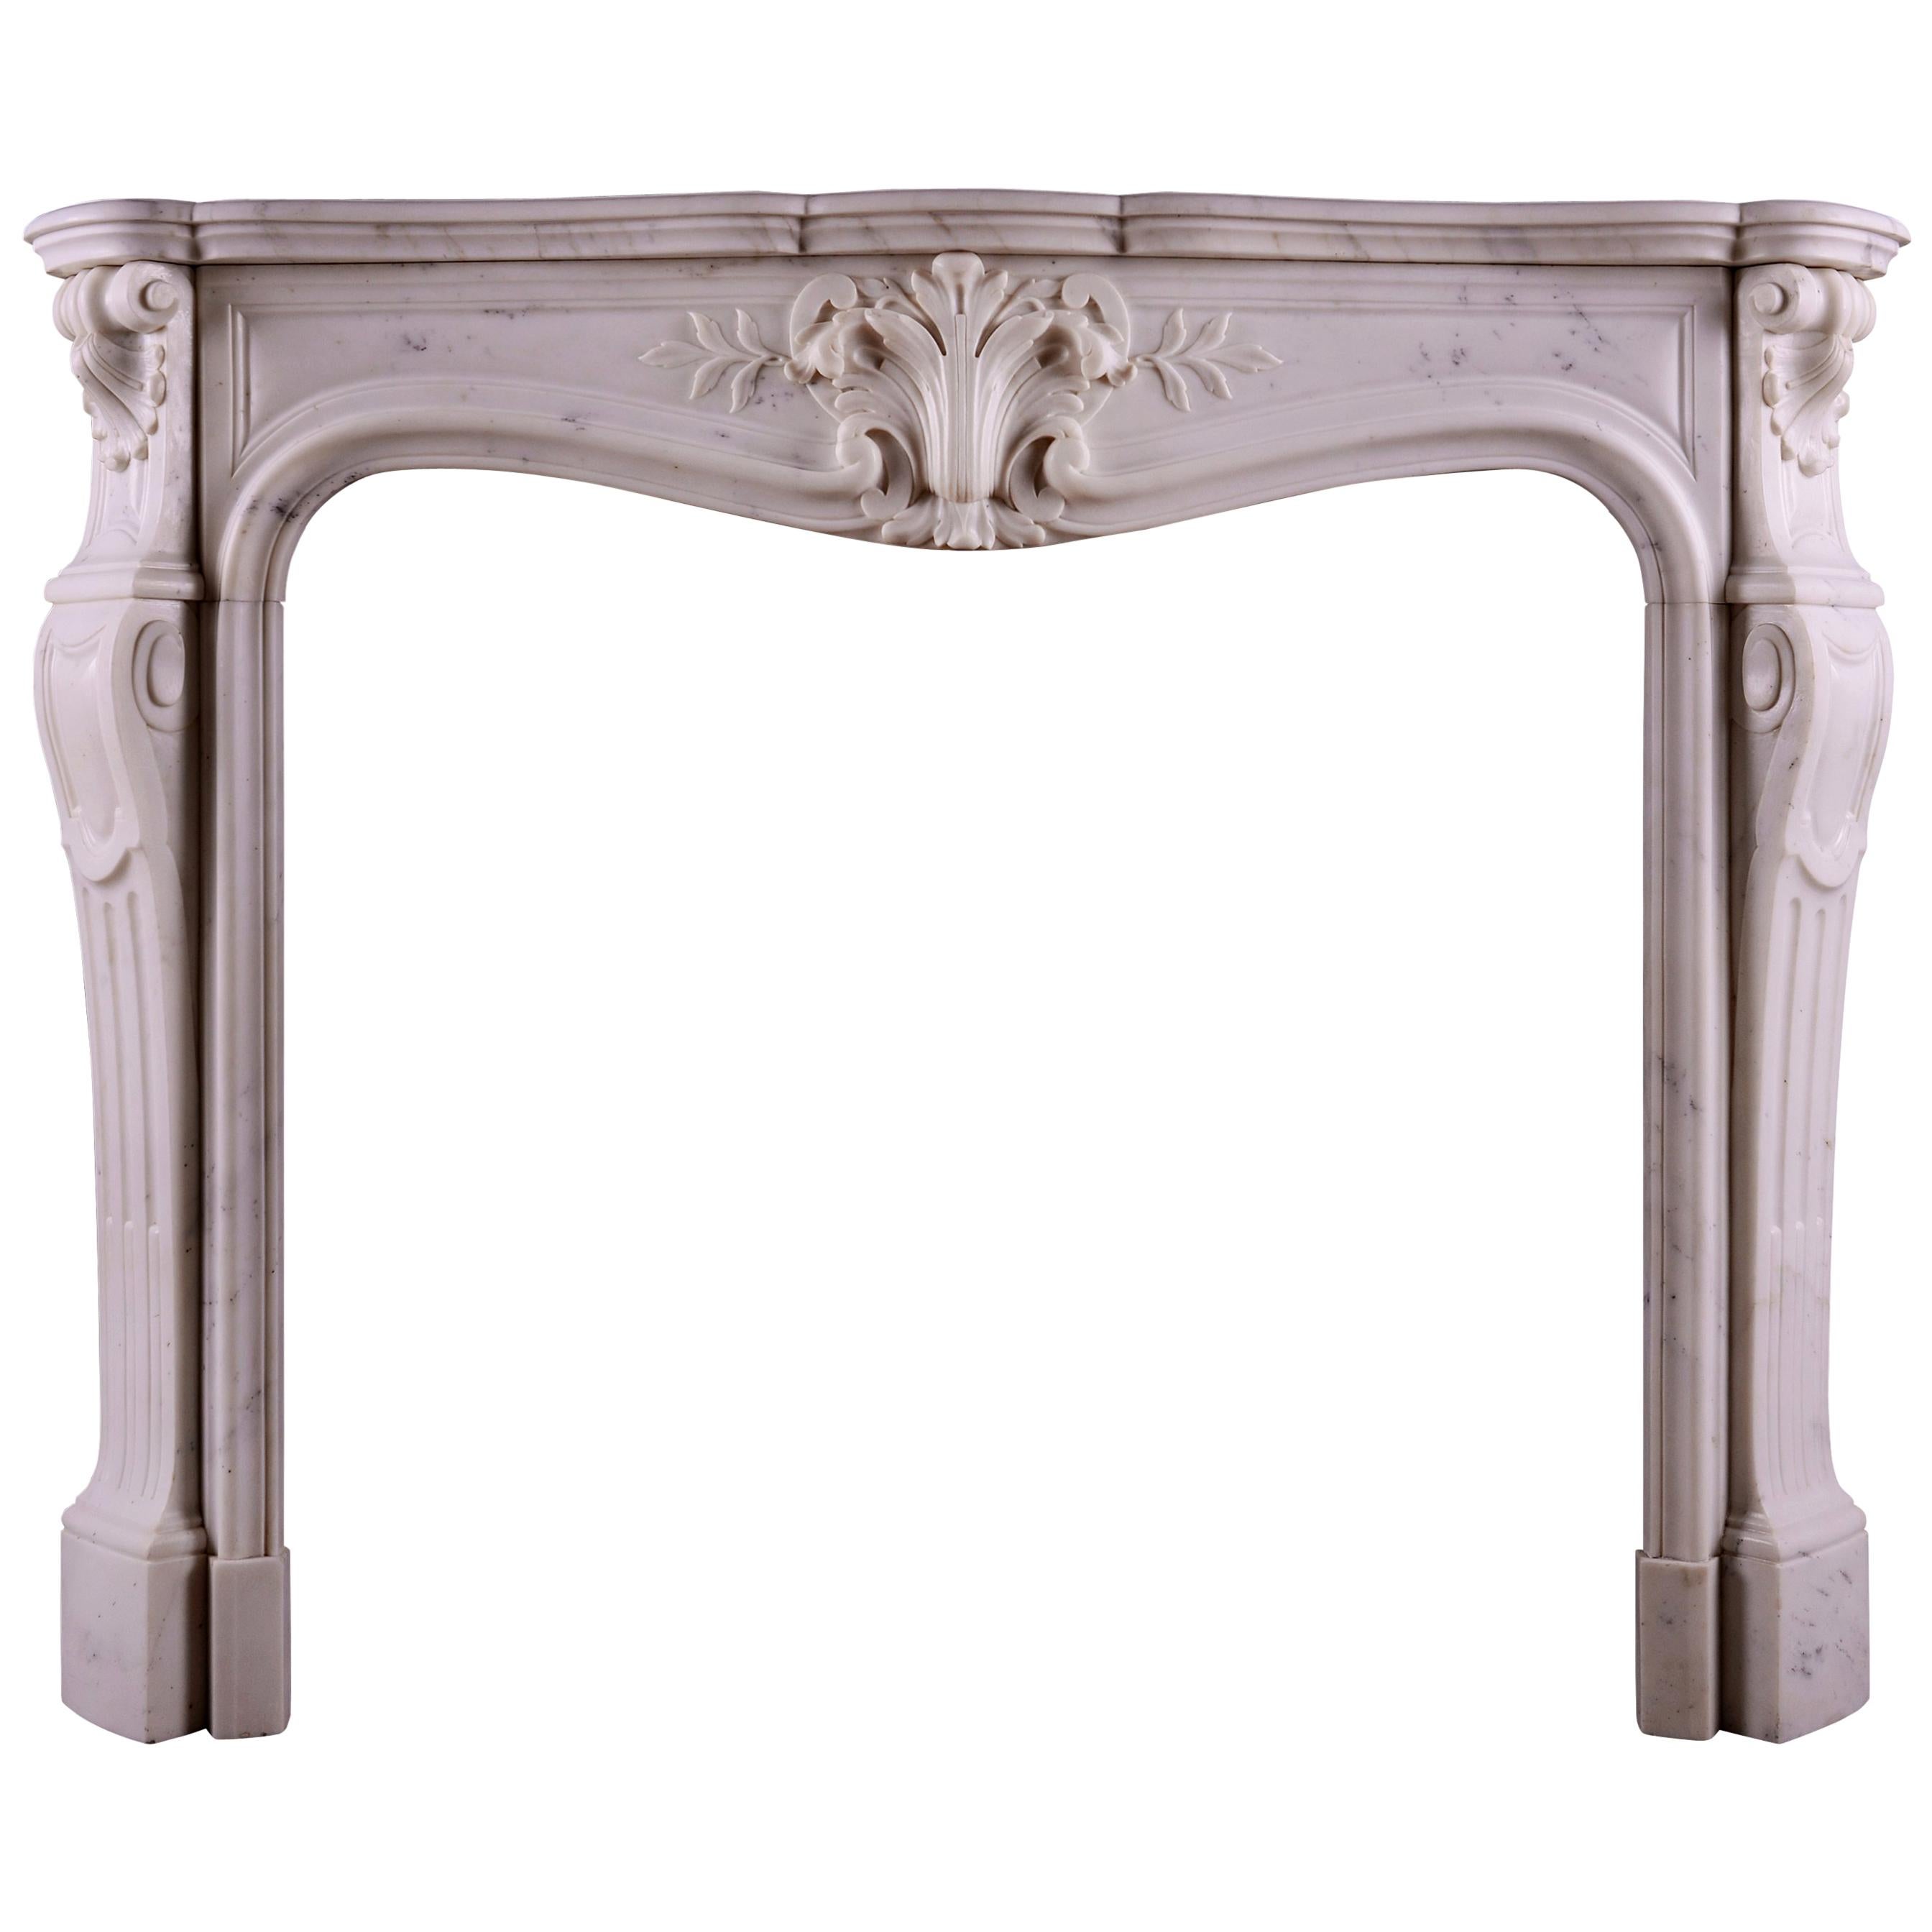 Statuary Marble Fireplace in the Louis XV Manner